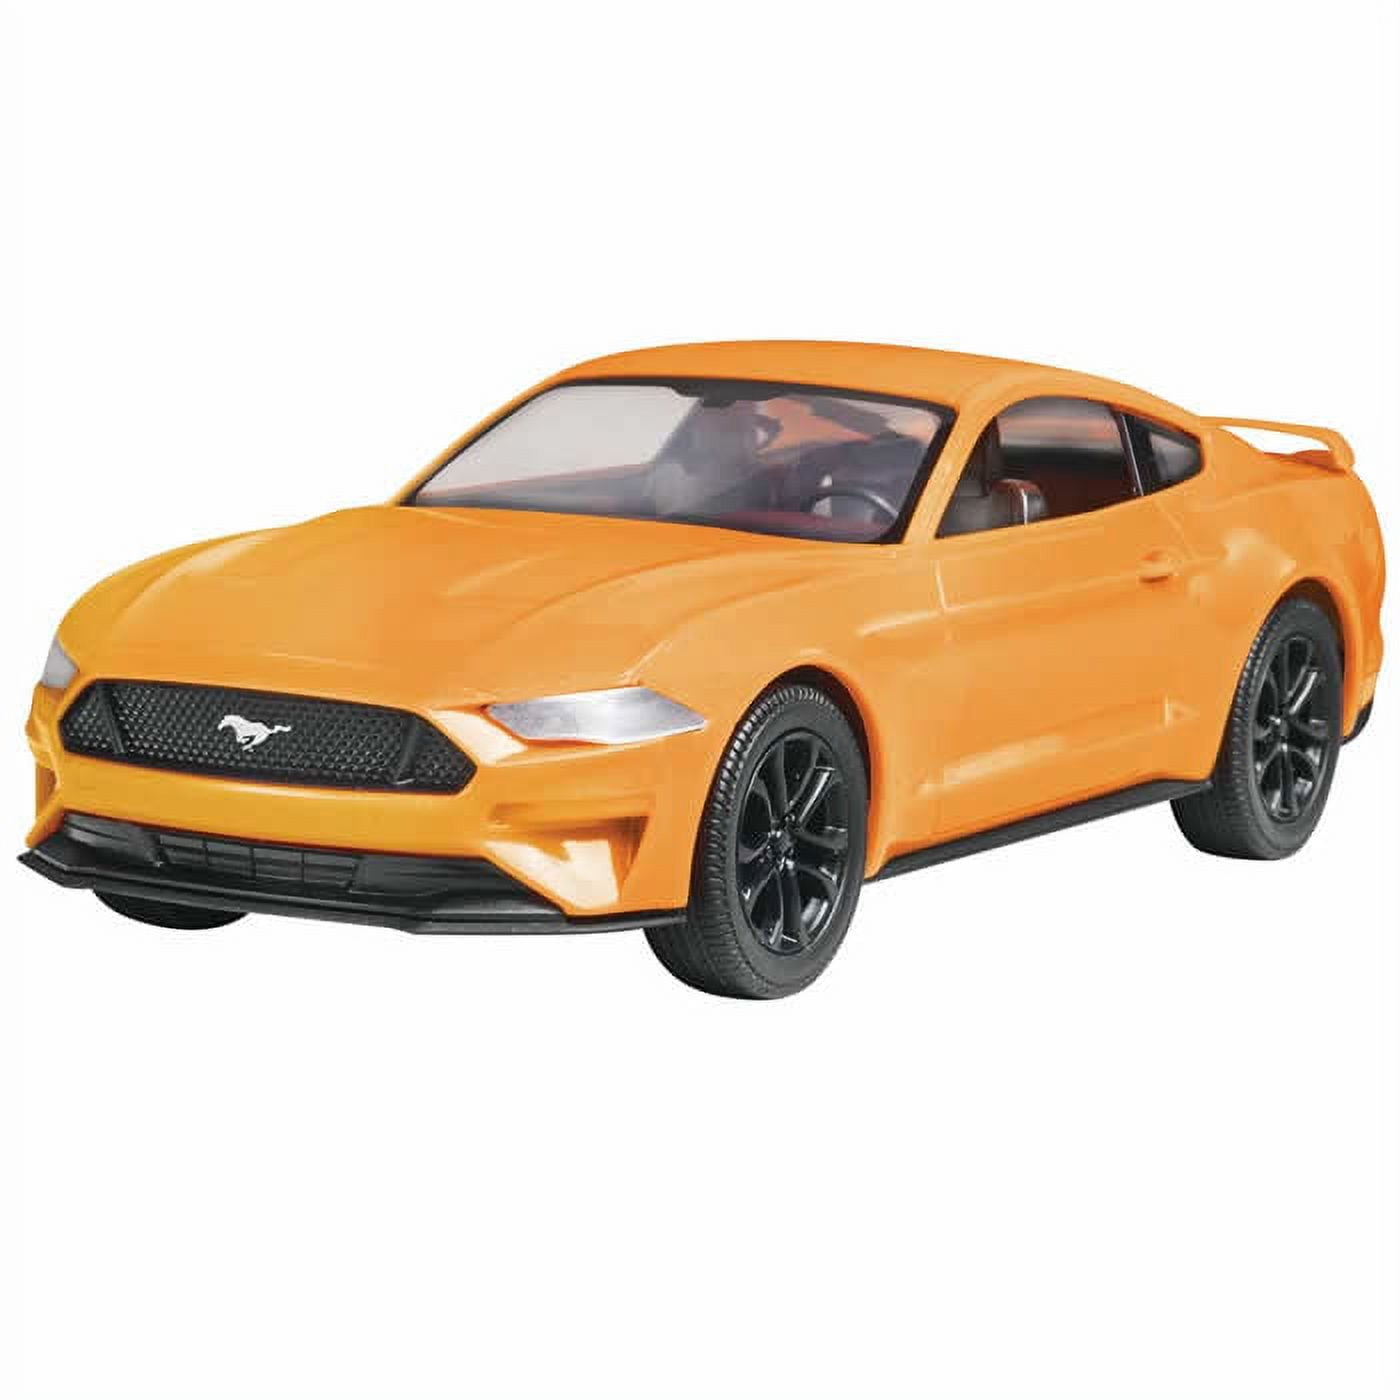 Maquette voiture : Snaptite : 2018 Mustang